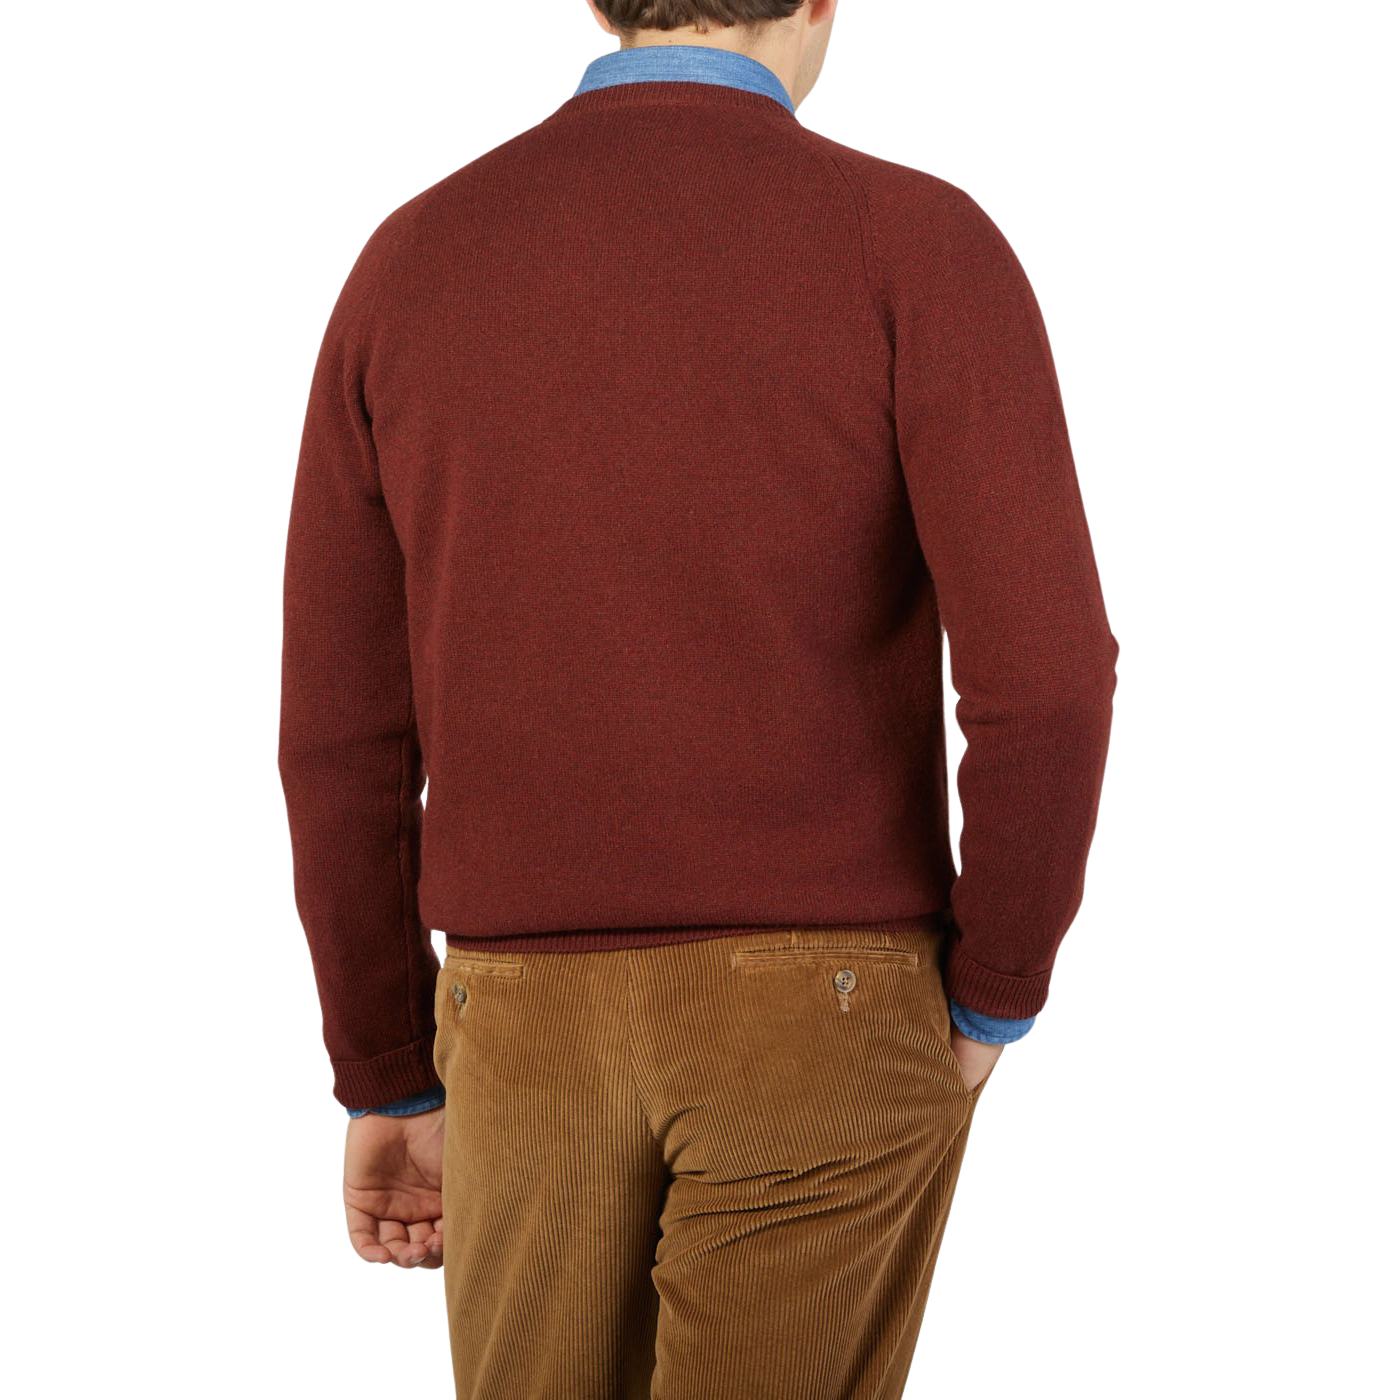 The back view of a man wearing an Alan Paine Nebula Red Brown Lambswool V-Neck sweater.